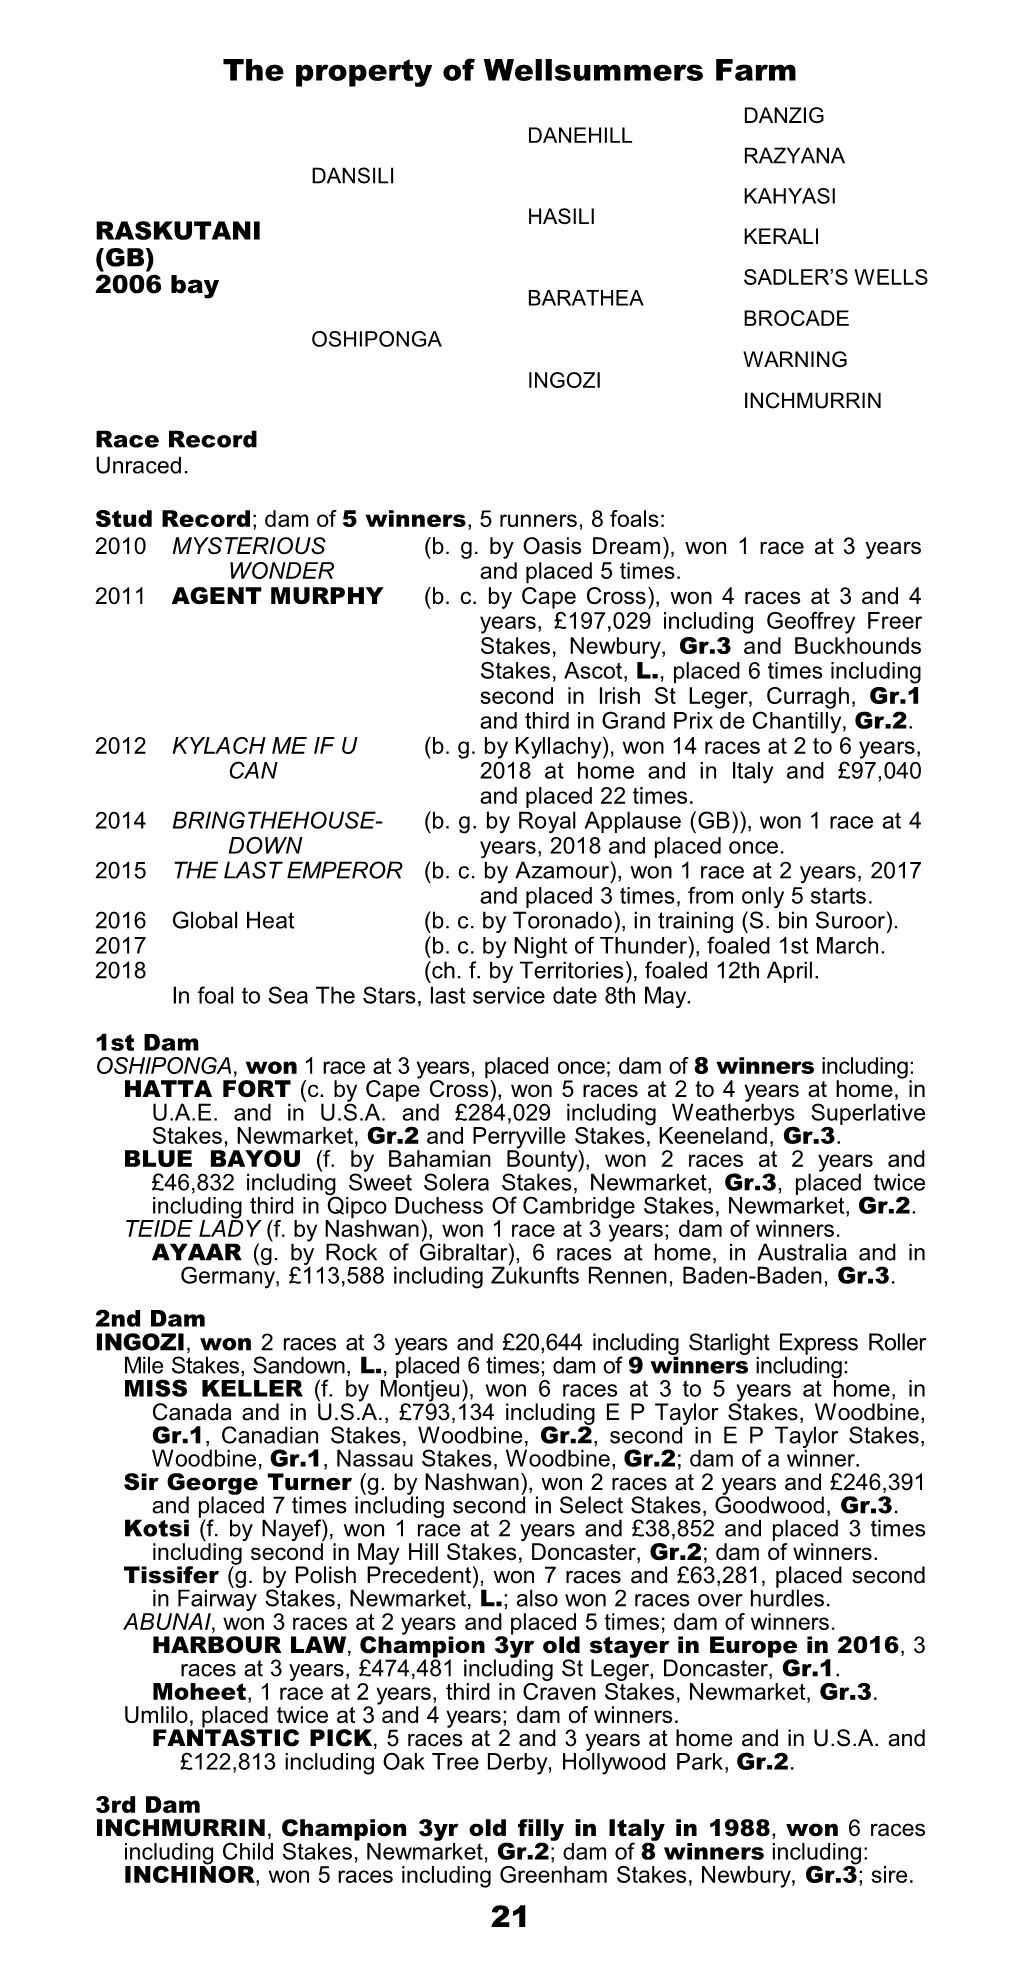 Race Record Unraced